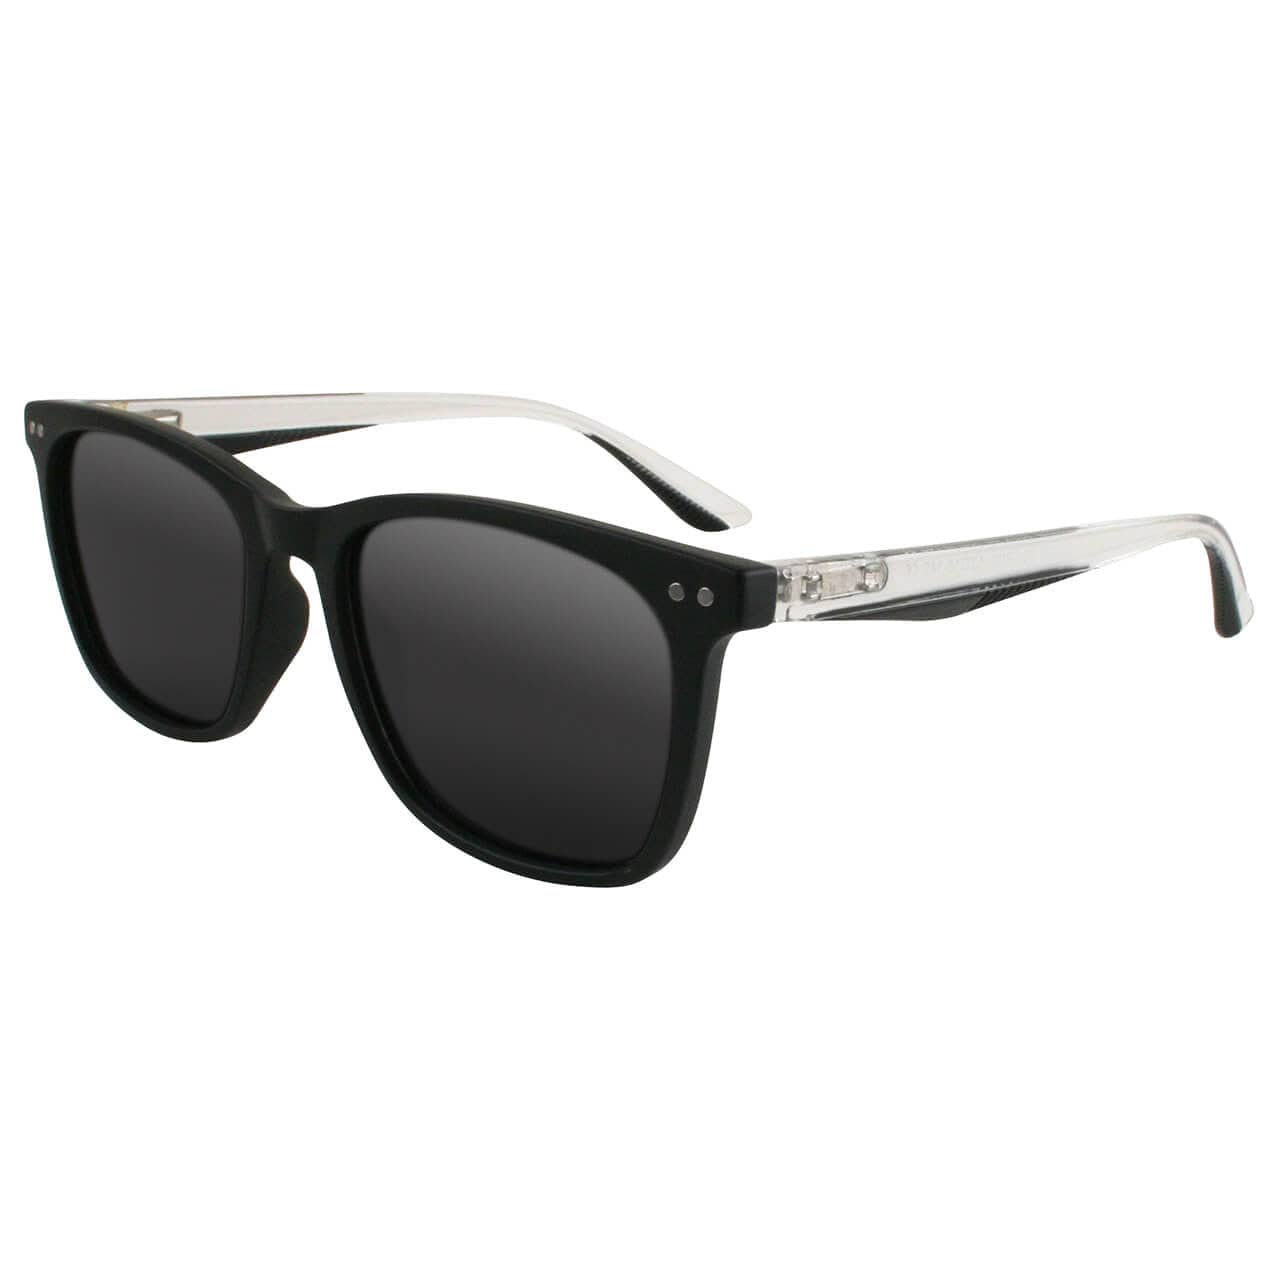 Solect Navigator Sunglasses with Black Frame and Gray Polarized Lenses